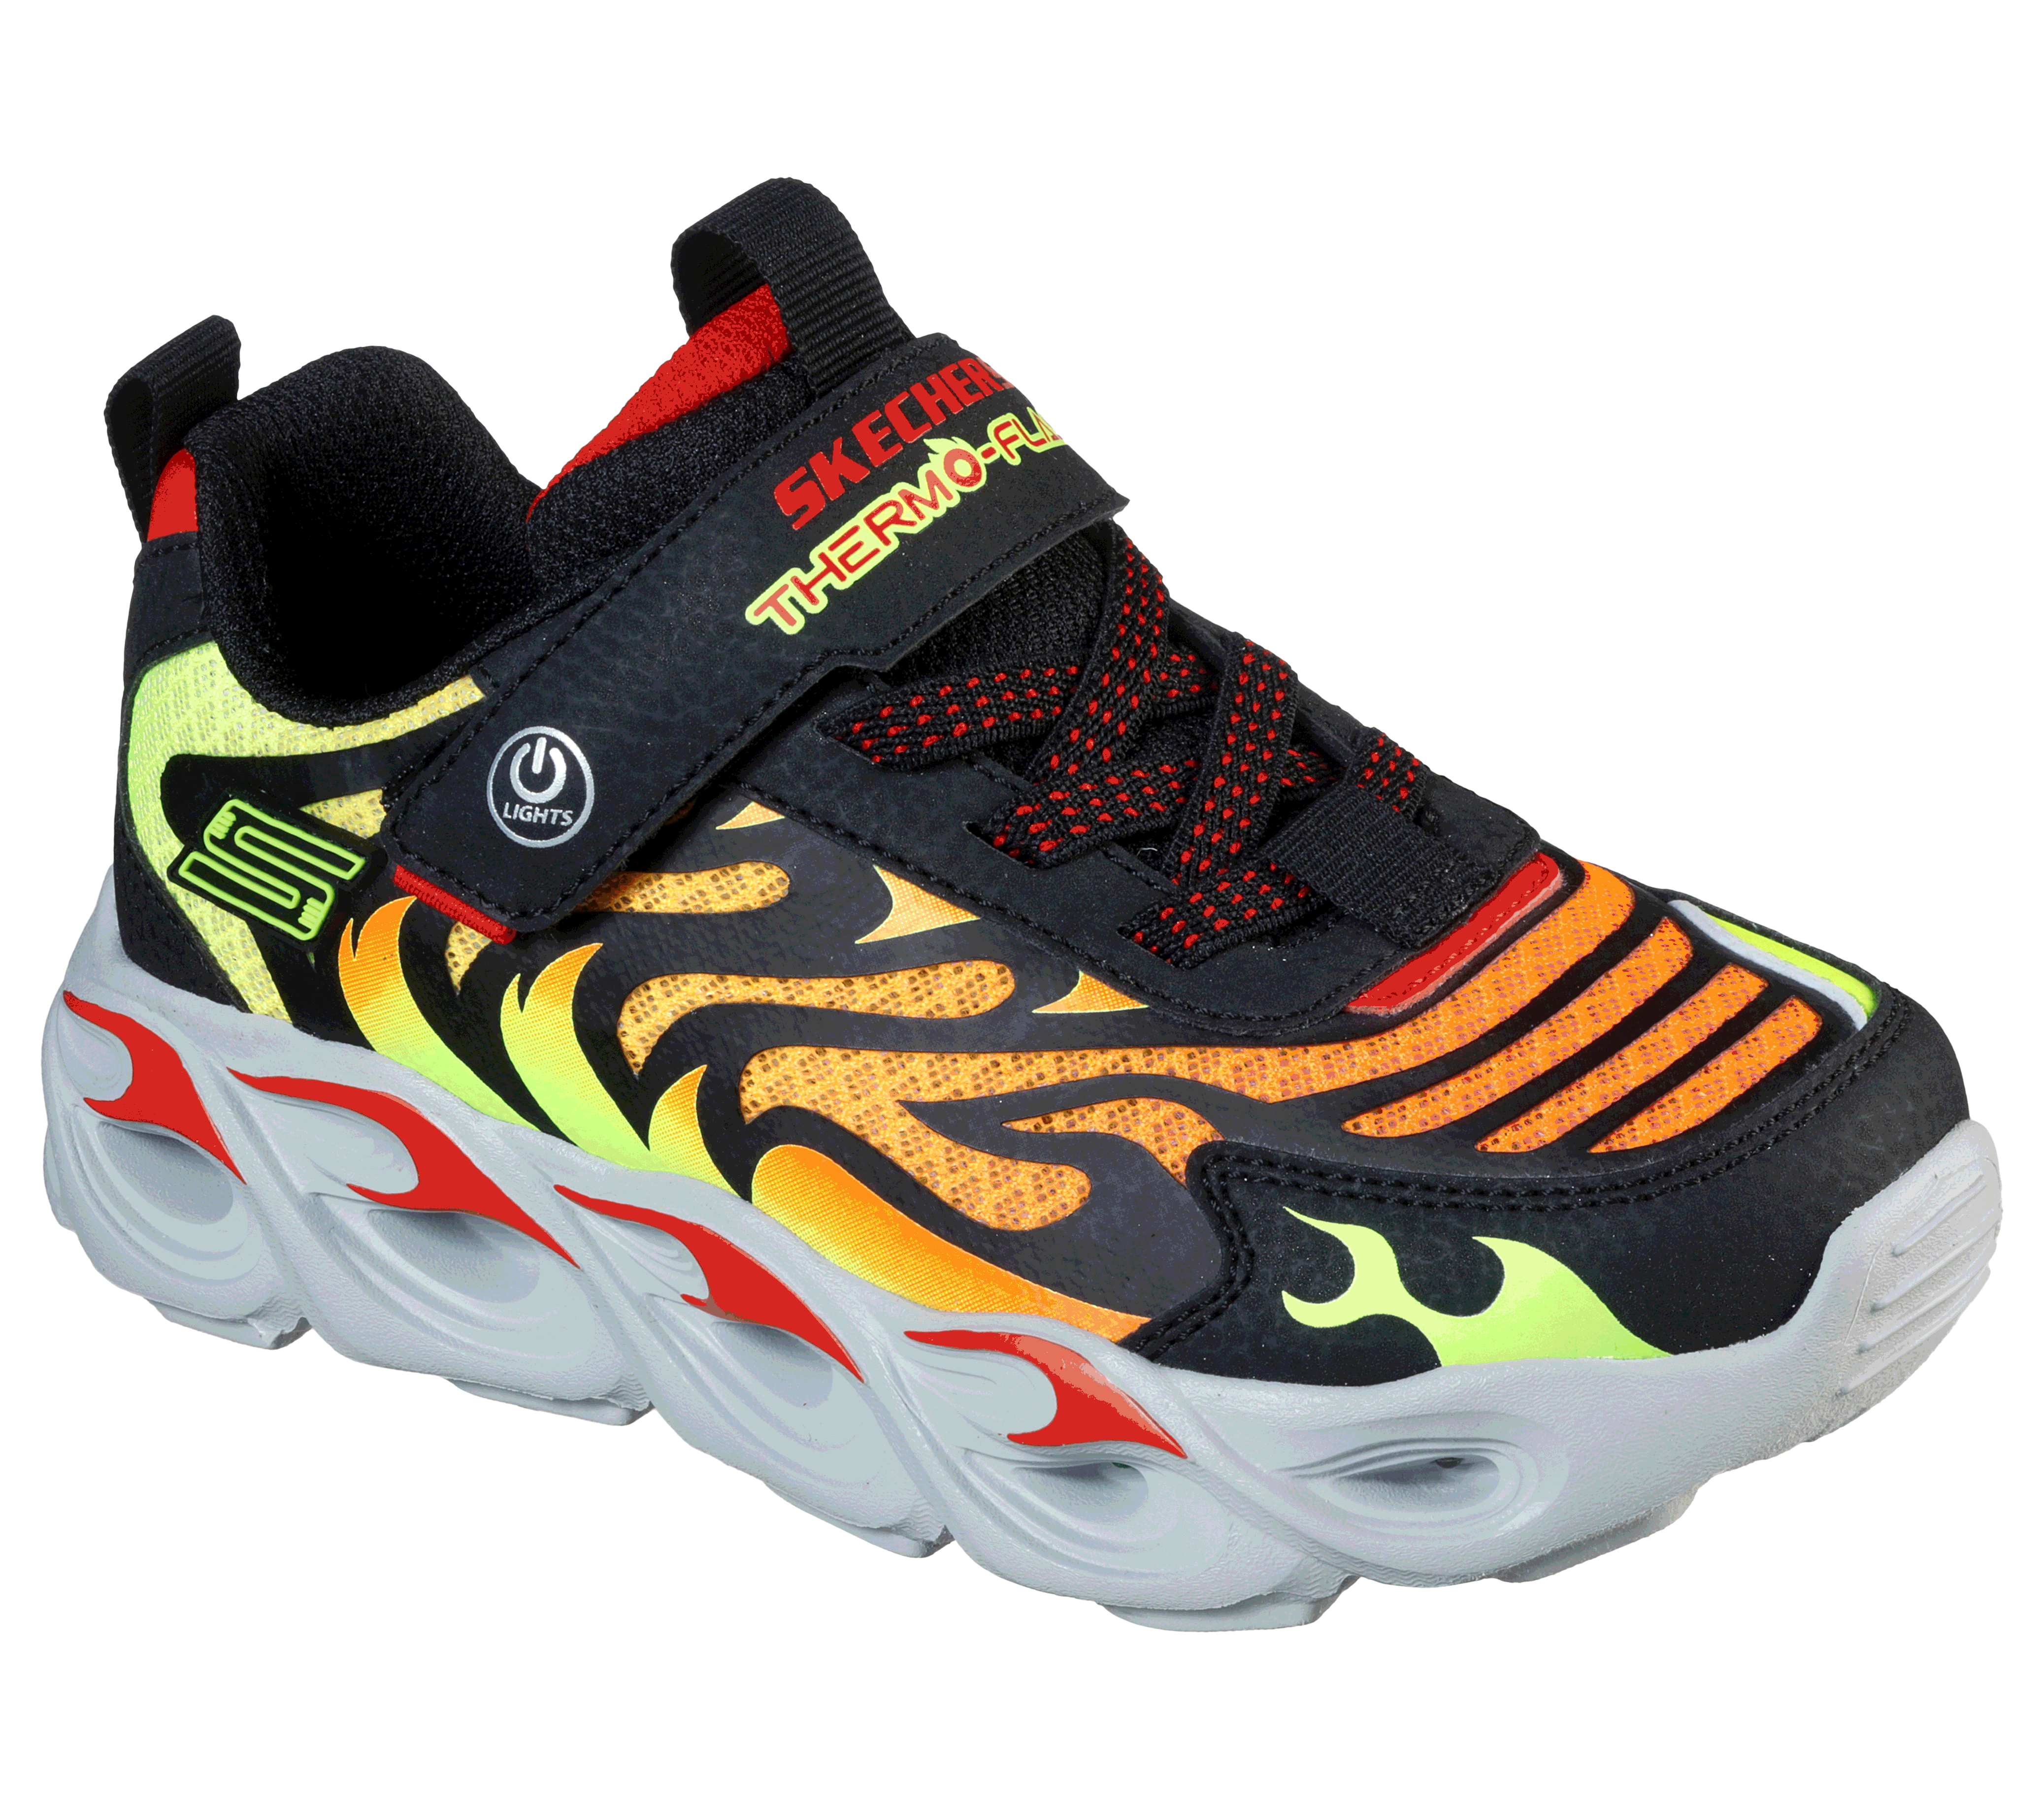 skechers light up shoes india